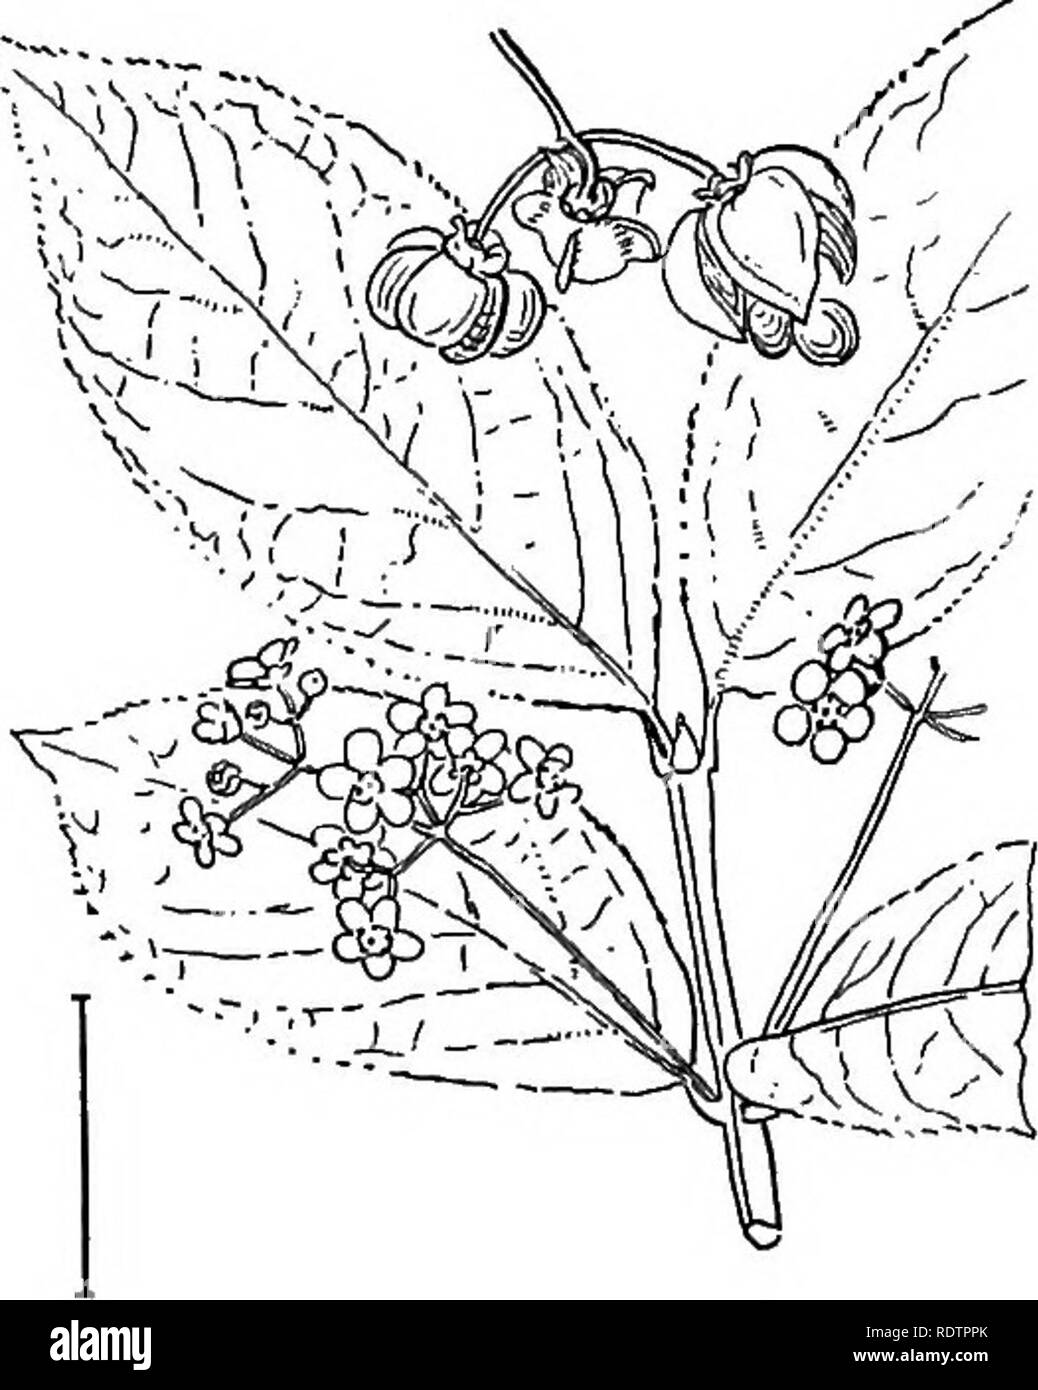 . Ornamental shrubs of the United States (hardy, cultivated). Shrubs. FiQ. 80. — Warty Euonymus. Fig. 81, — European Spindle Tree. opposite leaves and generally 4-sided twigs. The fruit, which is very ornamental in the fall, is a for the determination of the group by the heginner in the study of shruhs. These two colors are shown when the capsule hursts open and the bright red- or orange- coated seeds appear. Running Euontmus, (75) or Steawberkt Bbsh — Euonymus obovitus — has a straggling growth 2 to 5 feet high, thrives well in shady places, and receives its name from the rough warty- strawbe Stock Photo